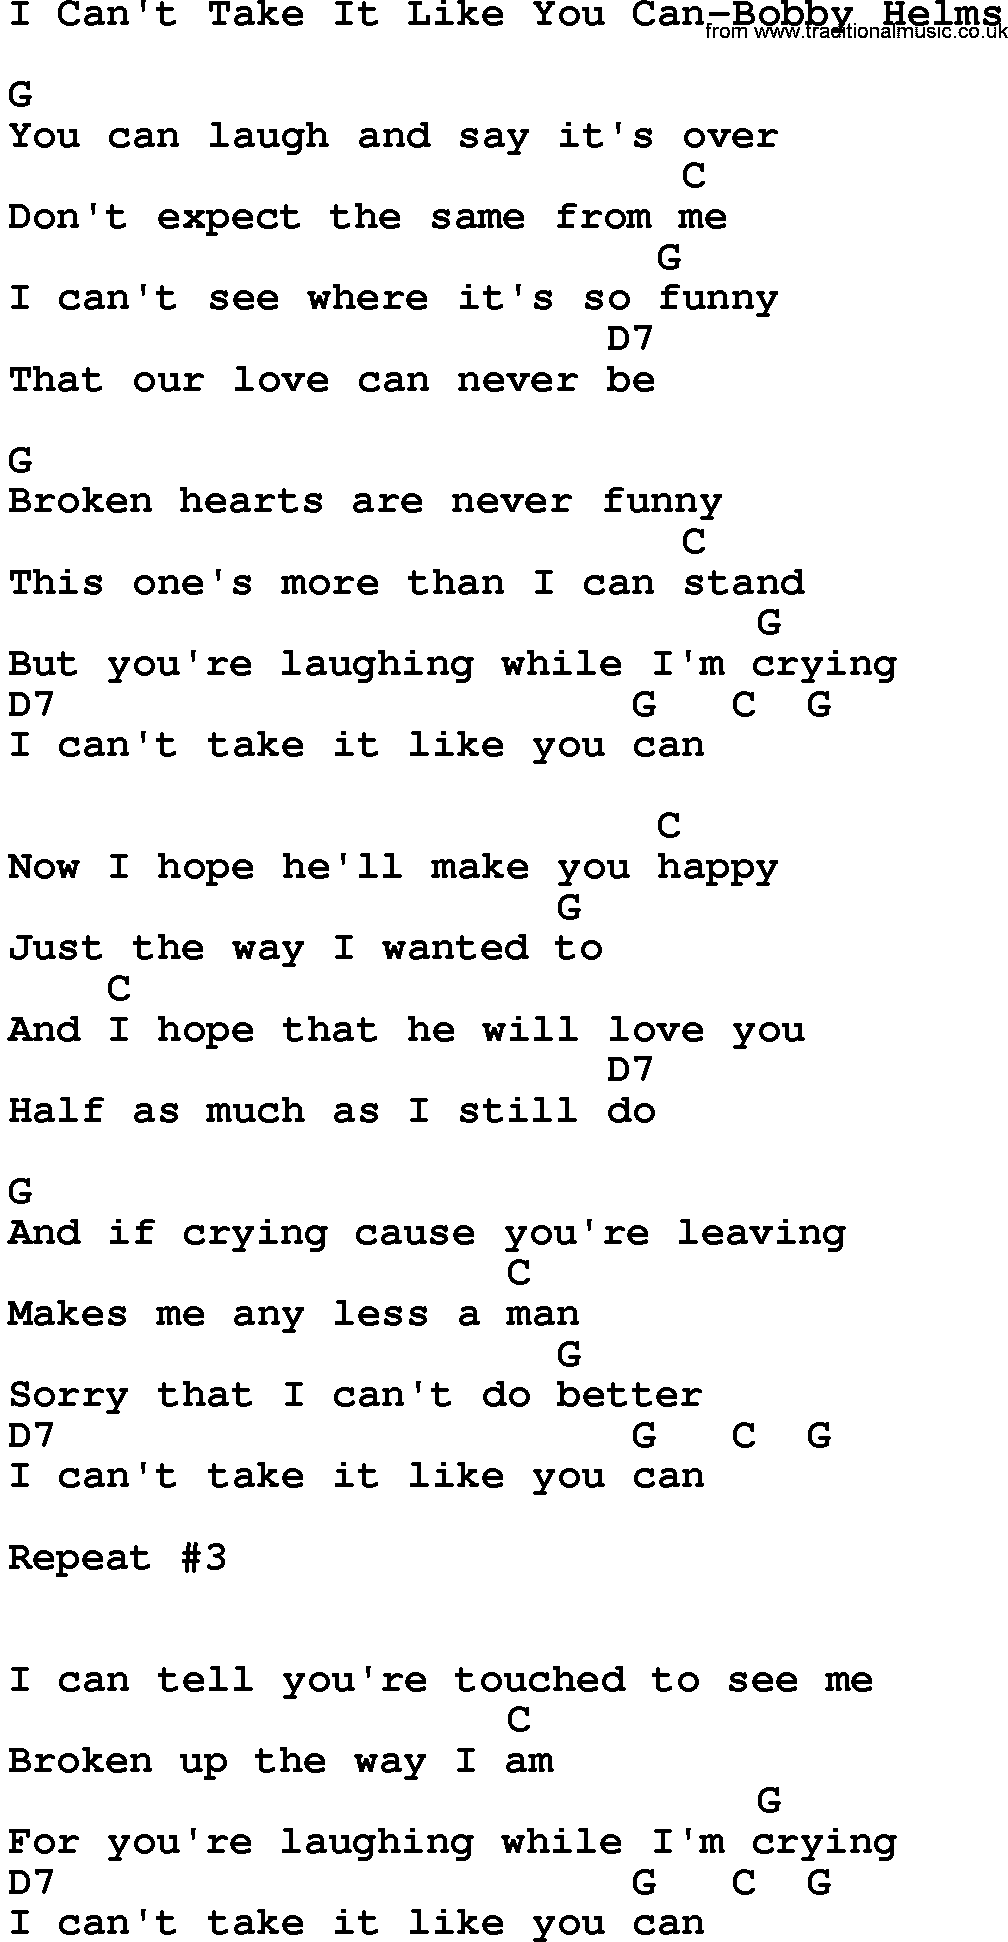 Country music song: I Can't Take It Like You Can-Bobby Helms lyrics and chords